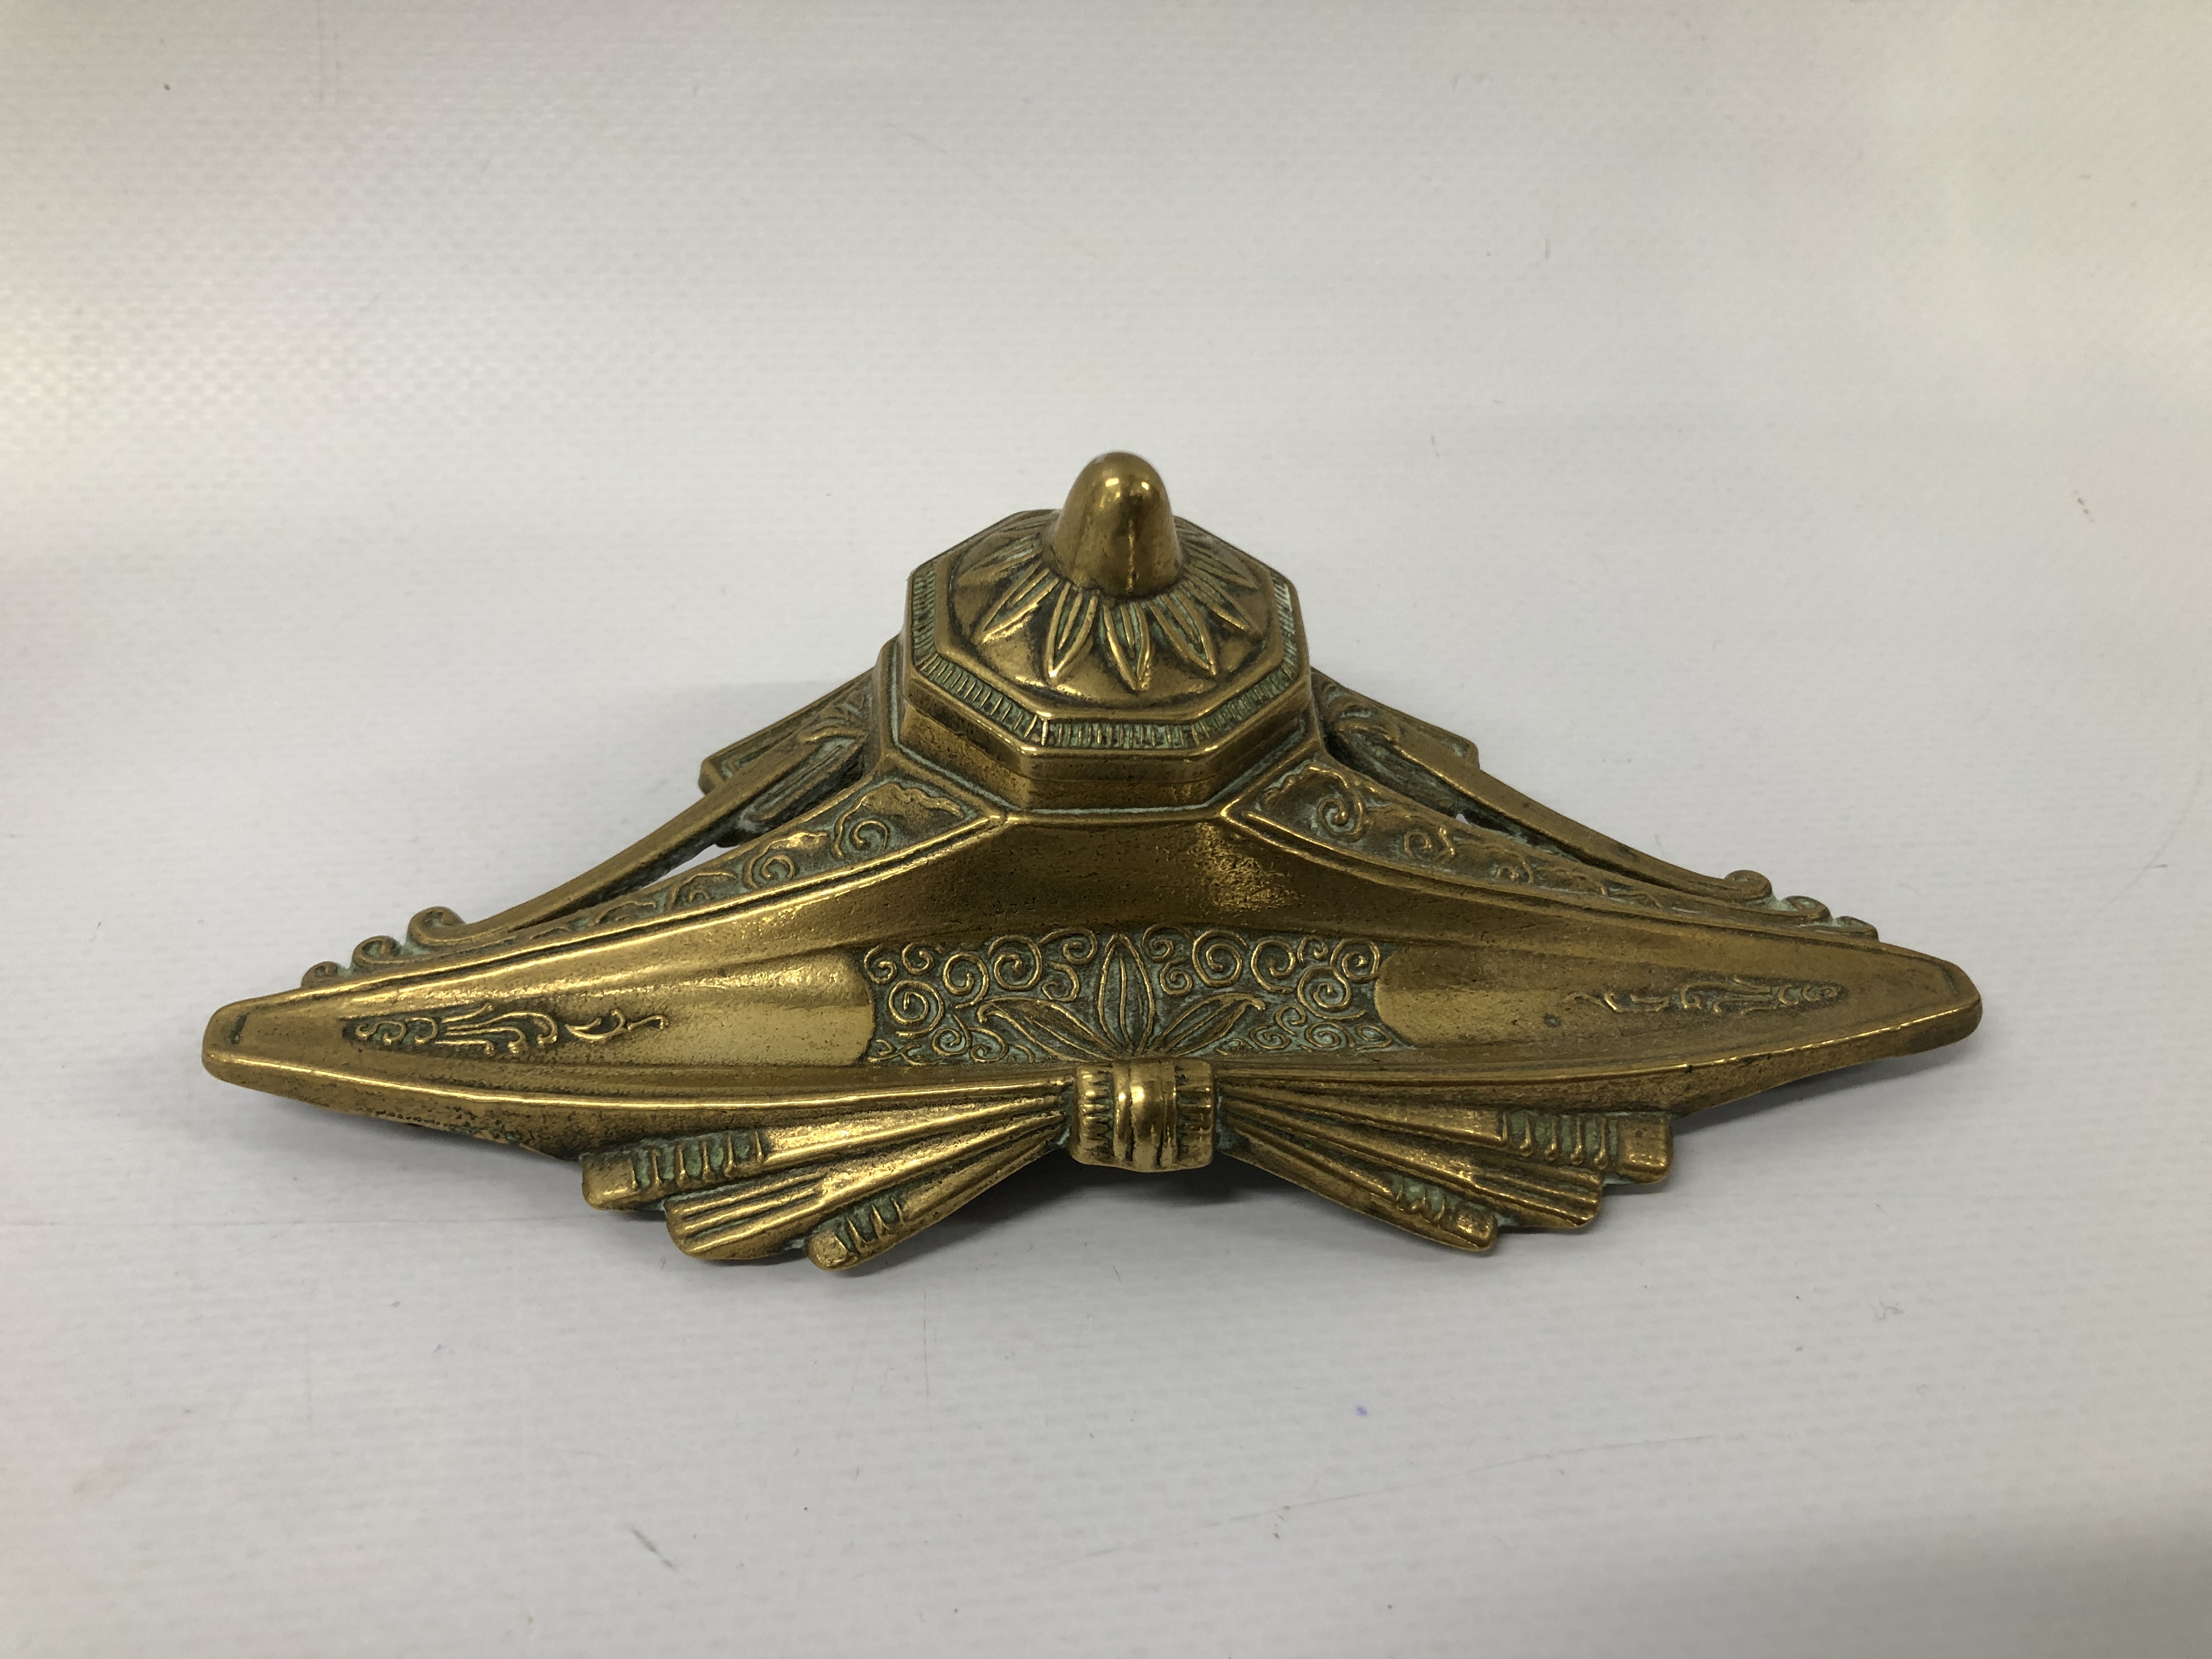 DECORATIVE BRASS INKWELL, HEAVY BRASS KINGFISHER ORNAMENT ON A DECORATIVE ENGRAVED BASE, - Image 5 of 10